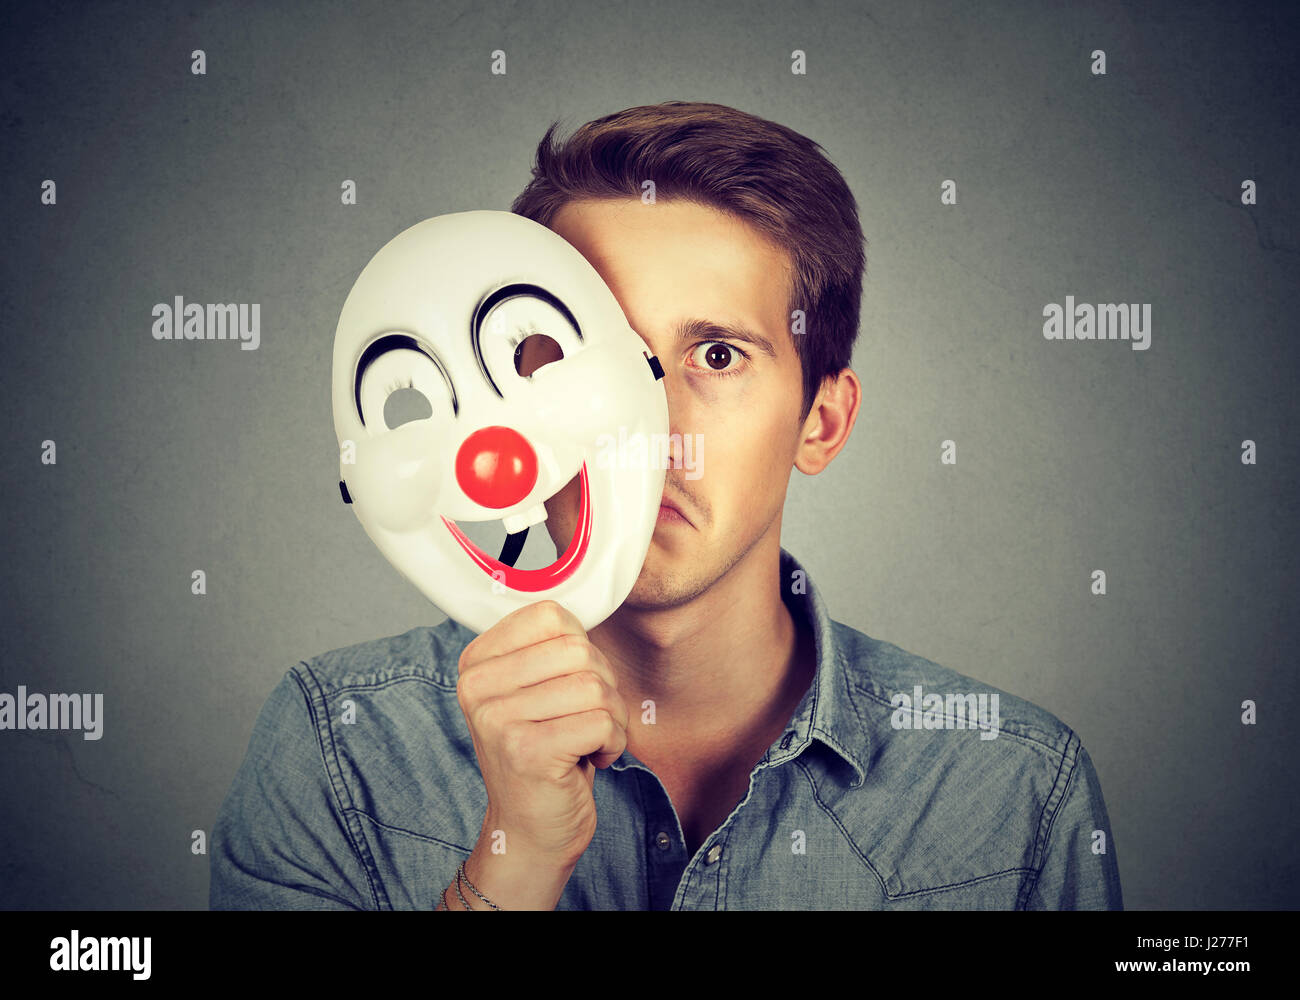 Young sad man hiding behind happy clown mask isolated on gray wall background. Human emotions Stock Photo